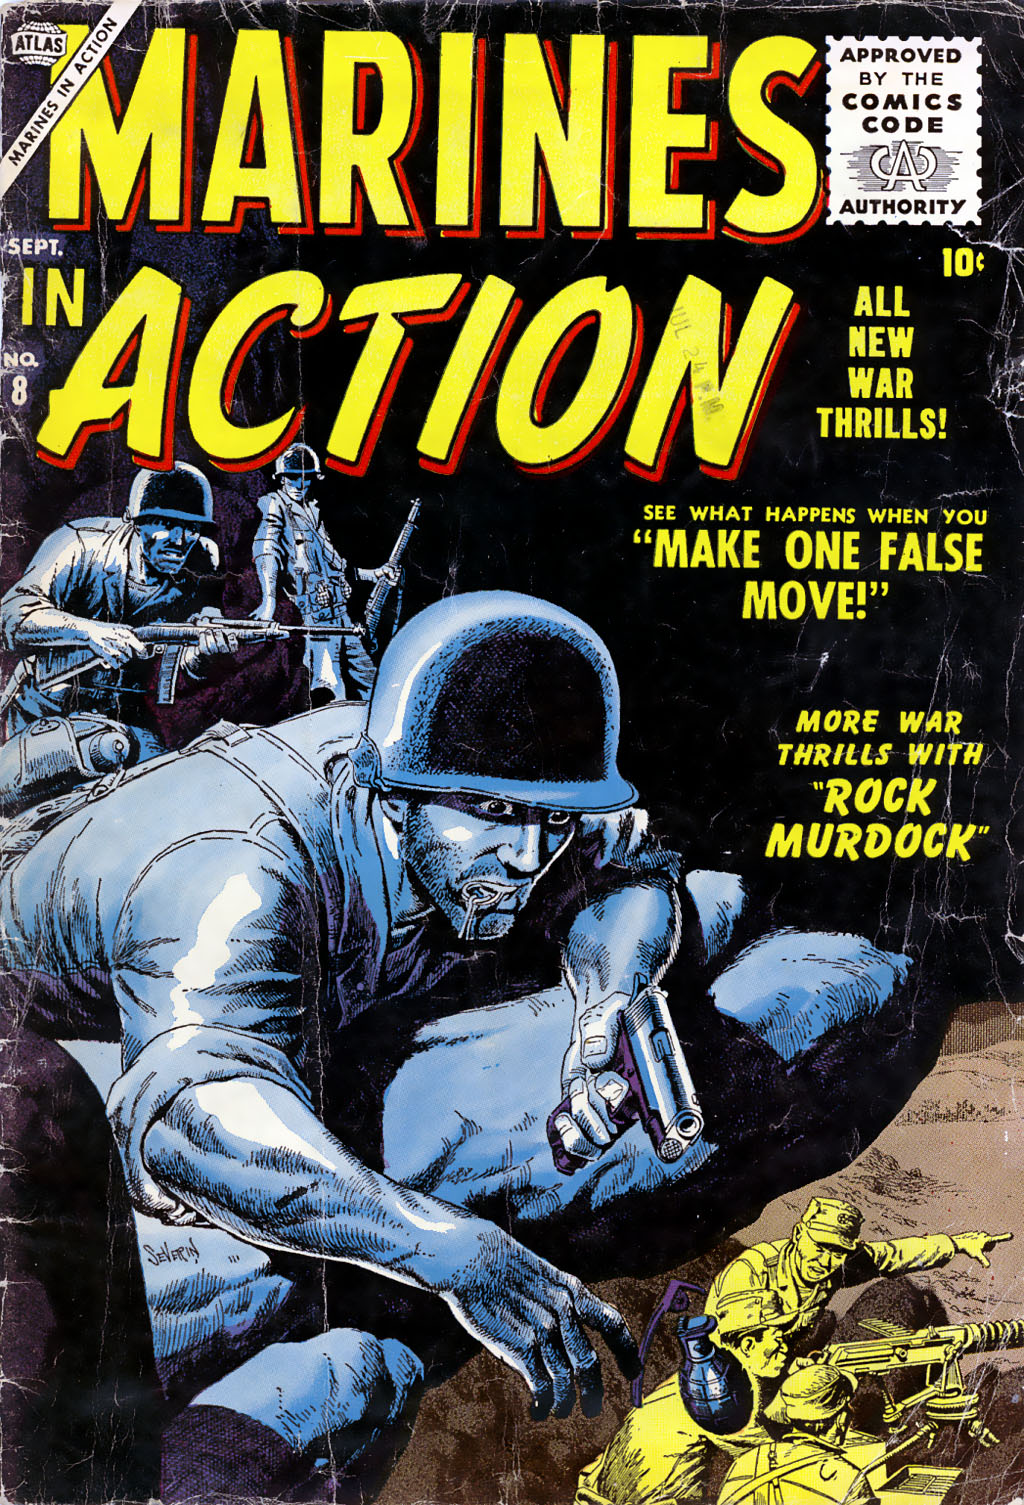 Read online Marines in Action comic -  Issue #8 - 1